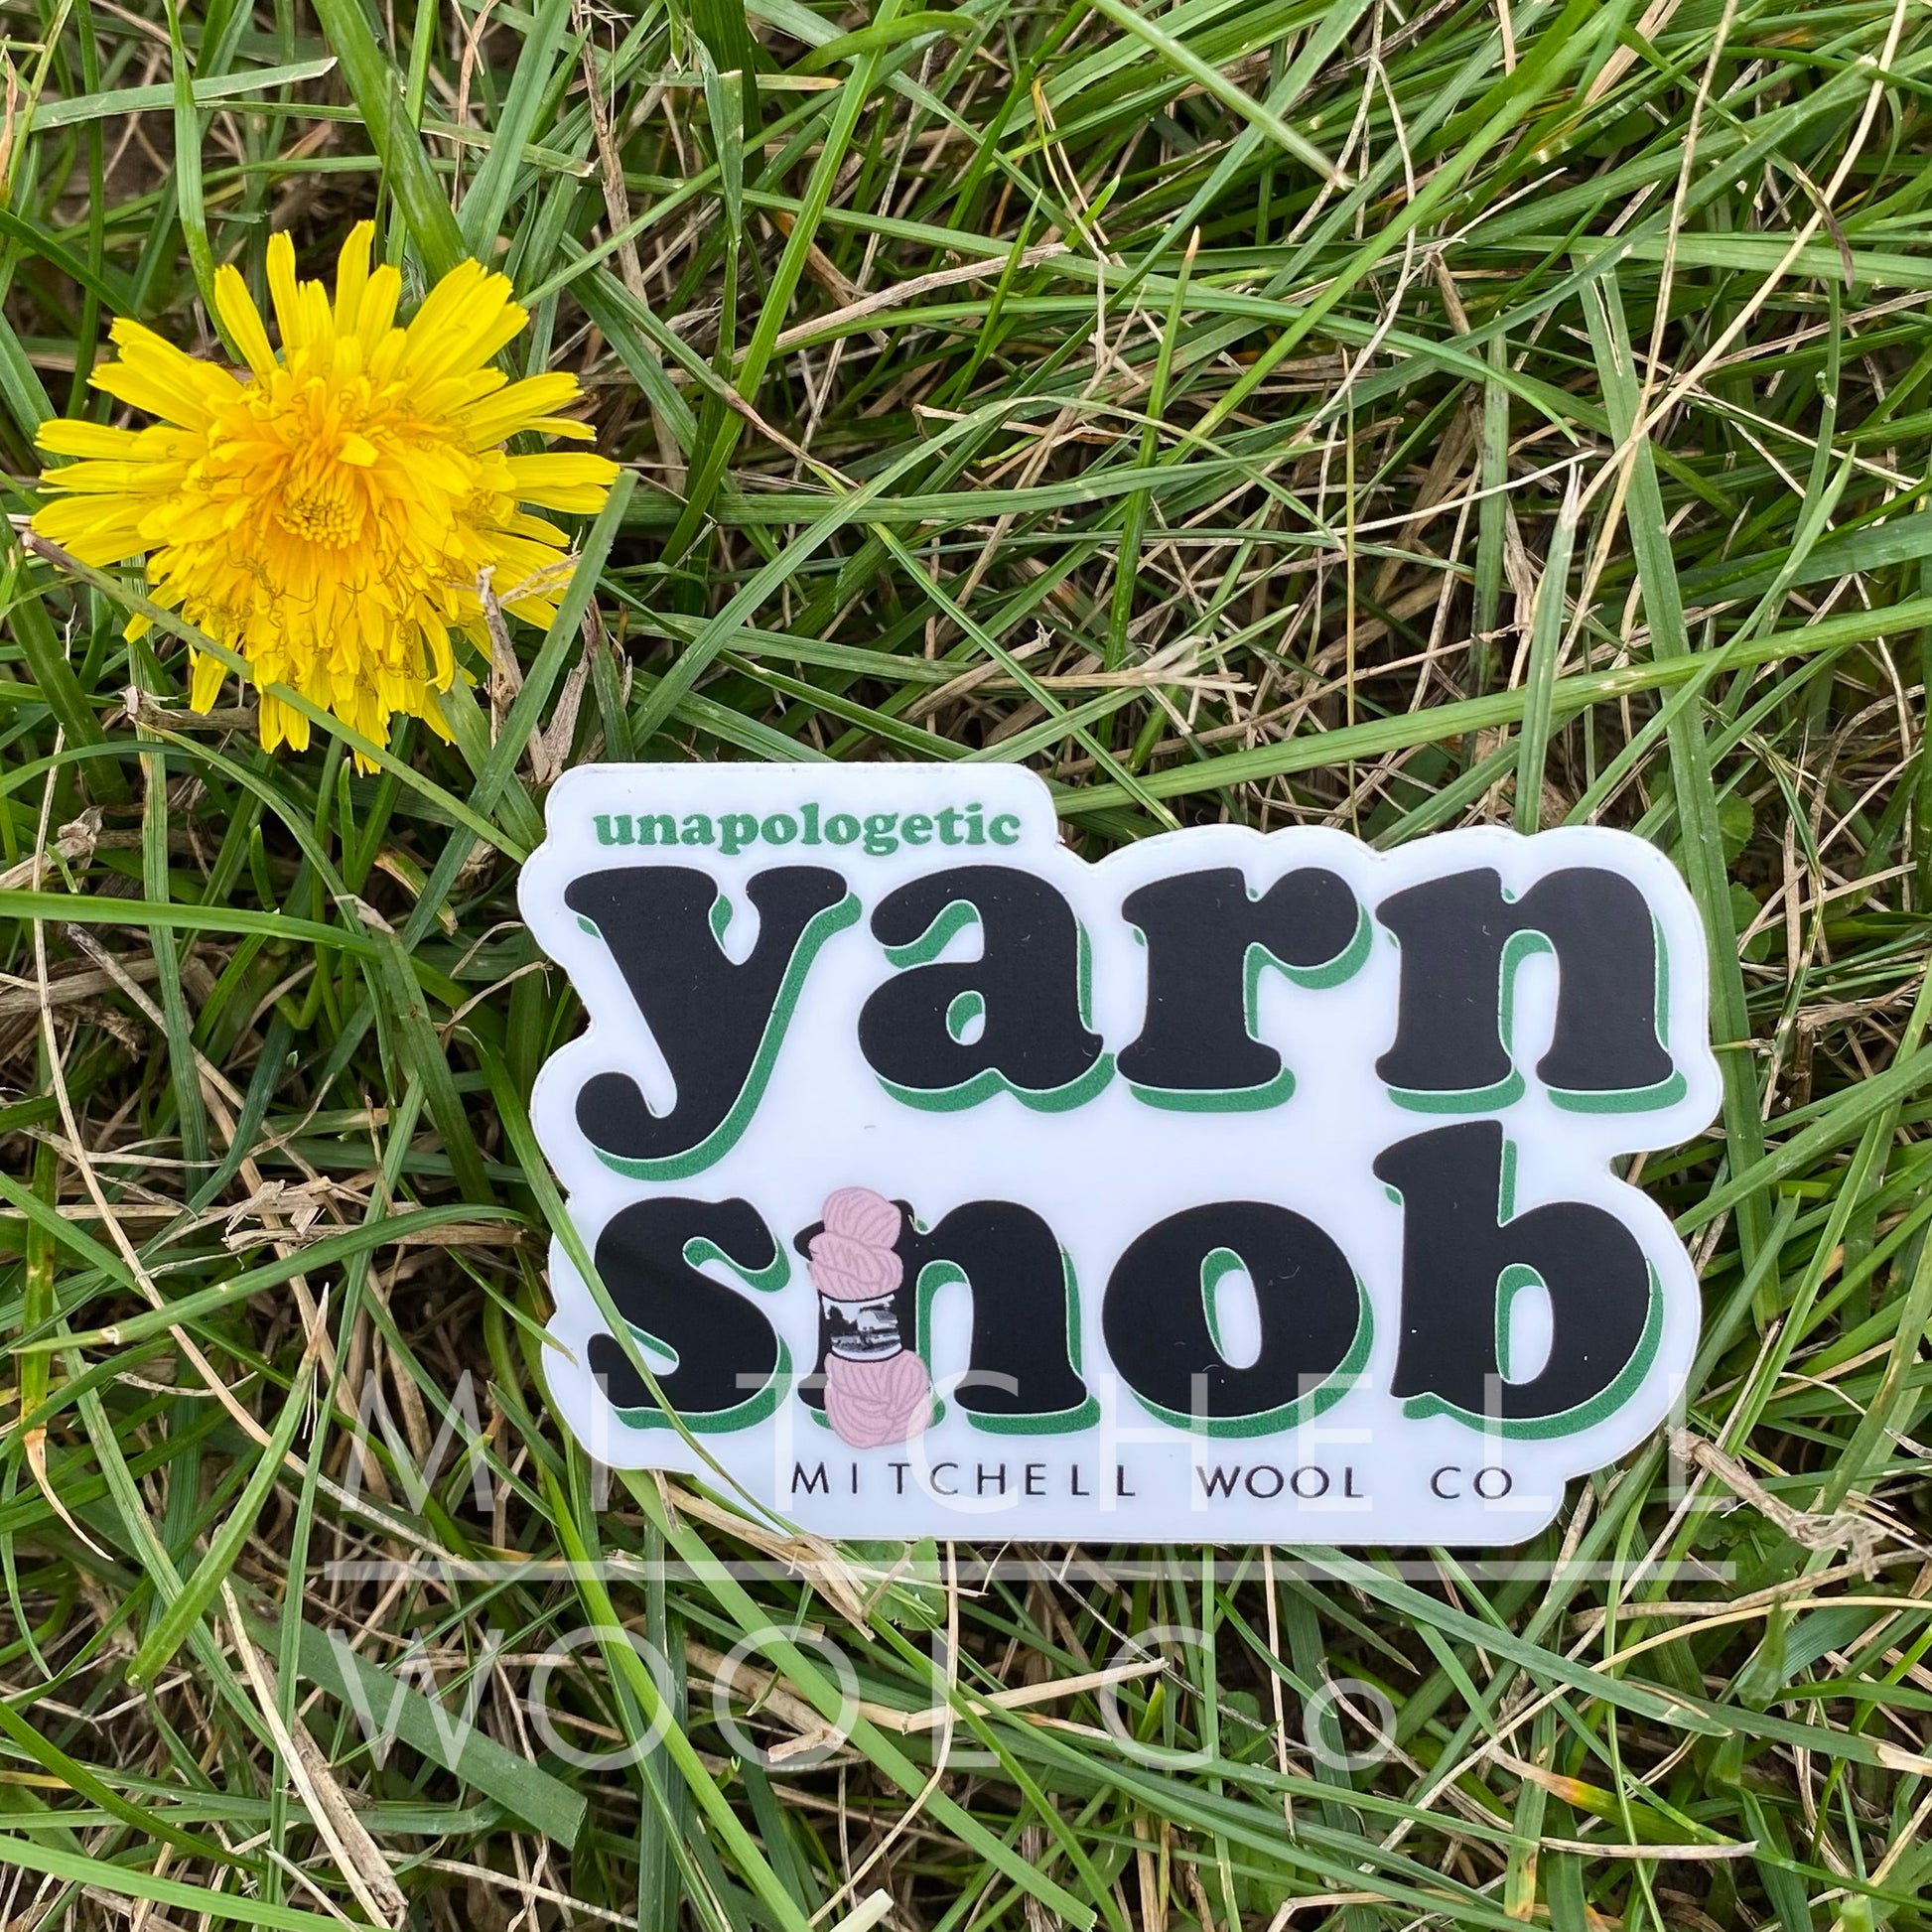 die cut 2.91x2" sticker with black and green saying "unapologetic yarn snob" with a light pink yarn skein on the "n"